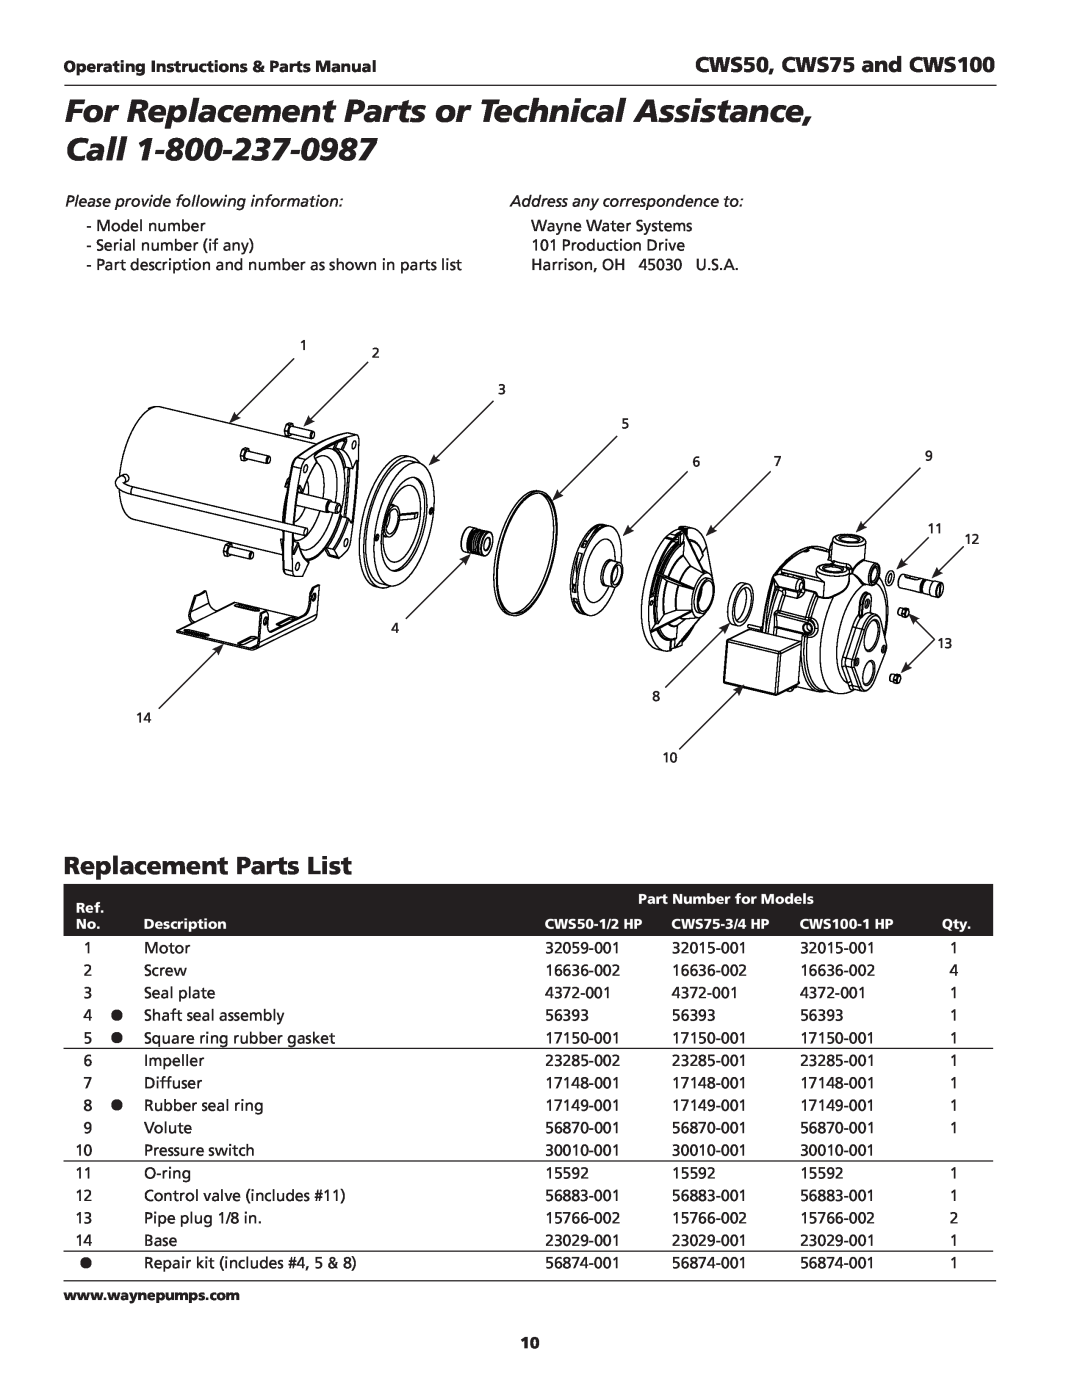 Wayne CWS75 Replacement Parts List, Please provide following information, Address any correspondence to, Model number 